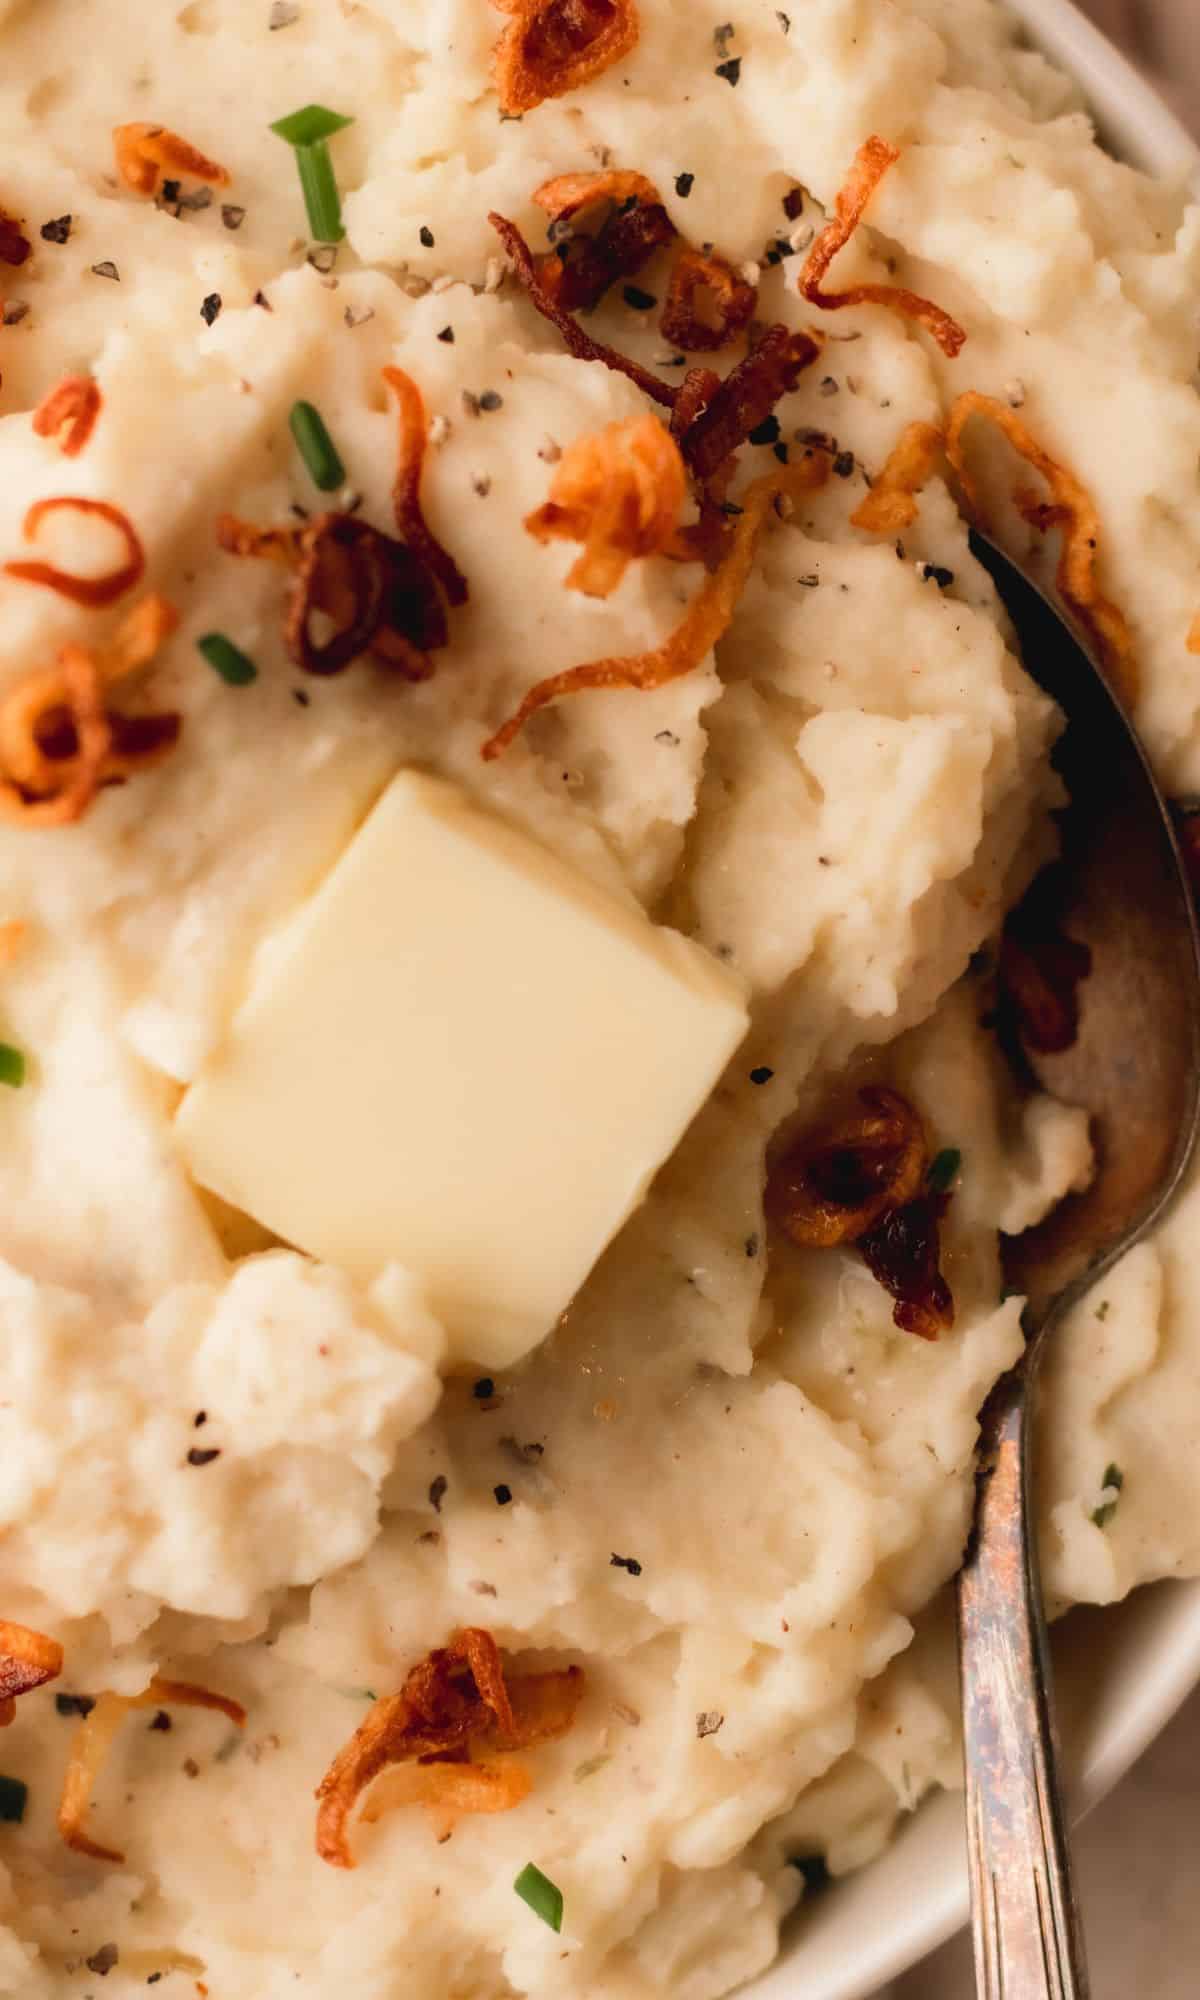 A bowl of mashed potatoes topped with crispy shallots and chives.